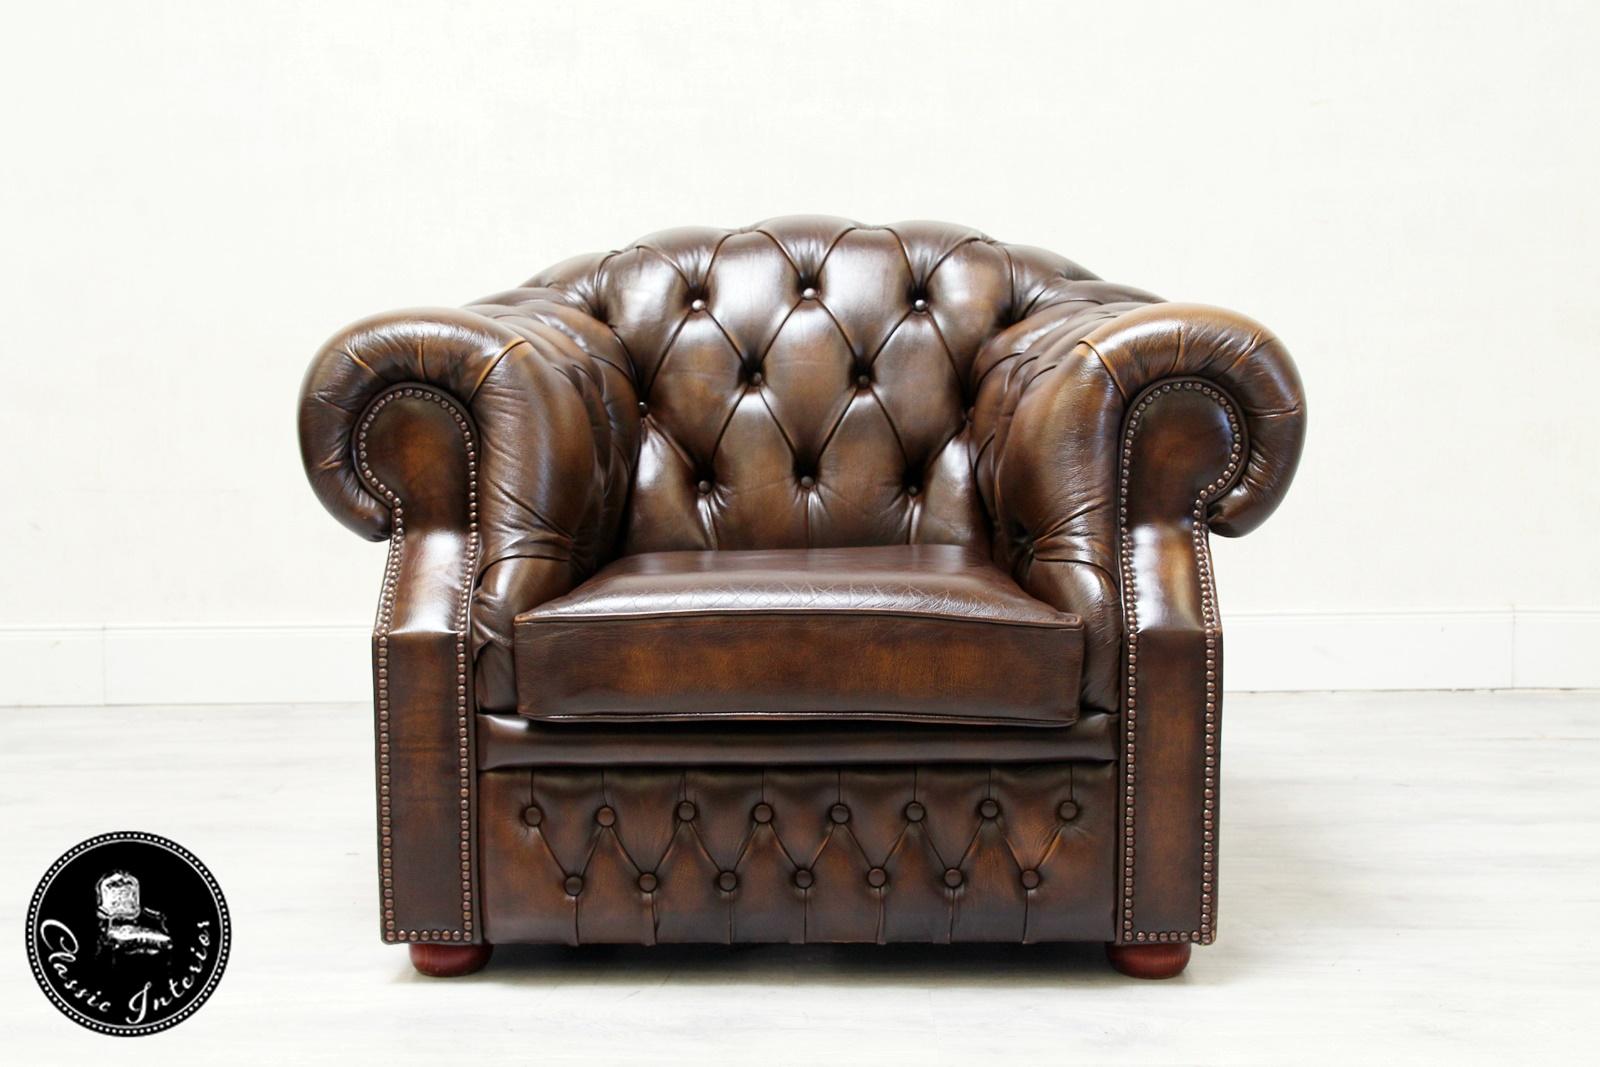 Chesterfield twin sofa and armchair
The shape is classic
armchair
Height x 79 cm, width x 100 cm, depth x 90 cm.
2-seat sofa
Height x 73 cm, length x 155 cm, depth x 85 cm.
color: Brown
Seating: Foam
Condition: The set is in a very good